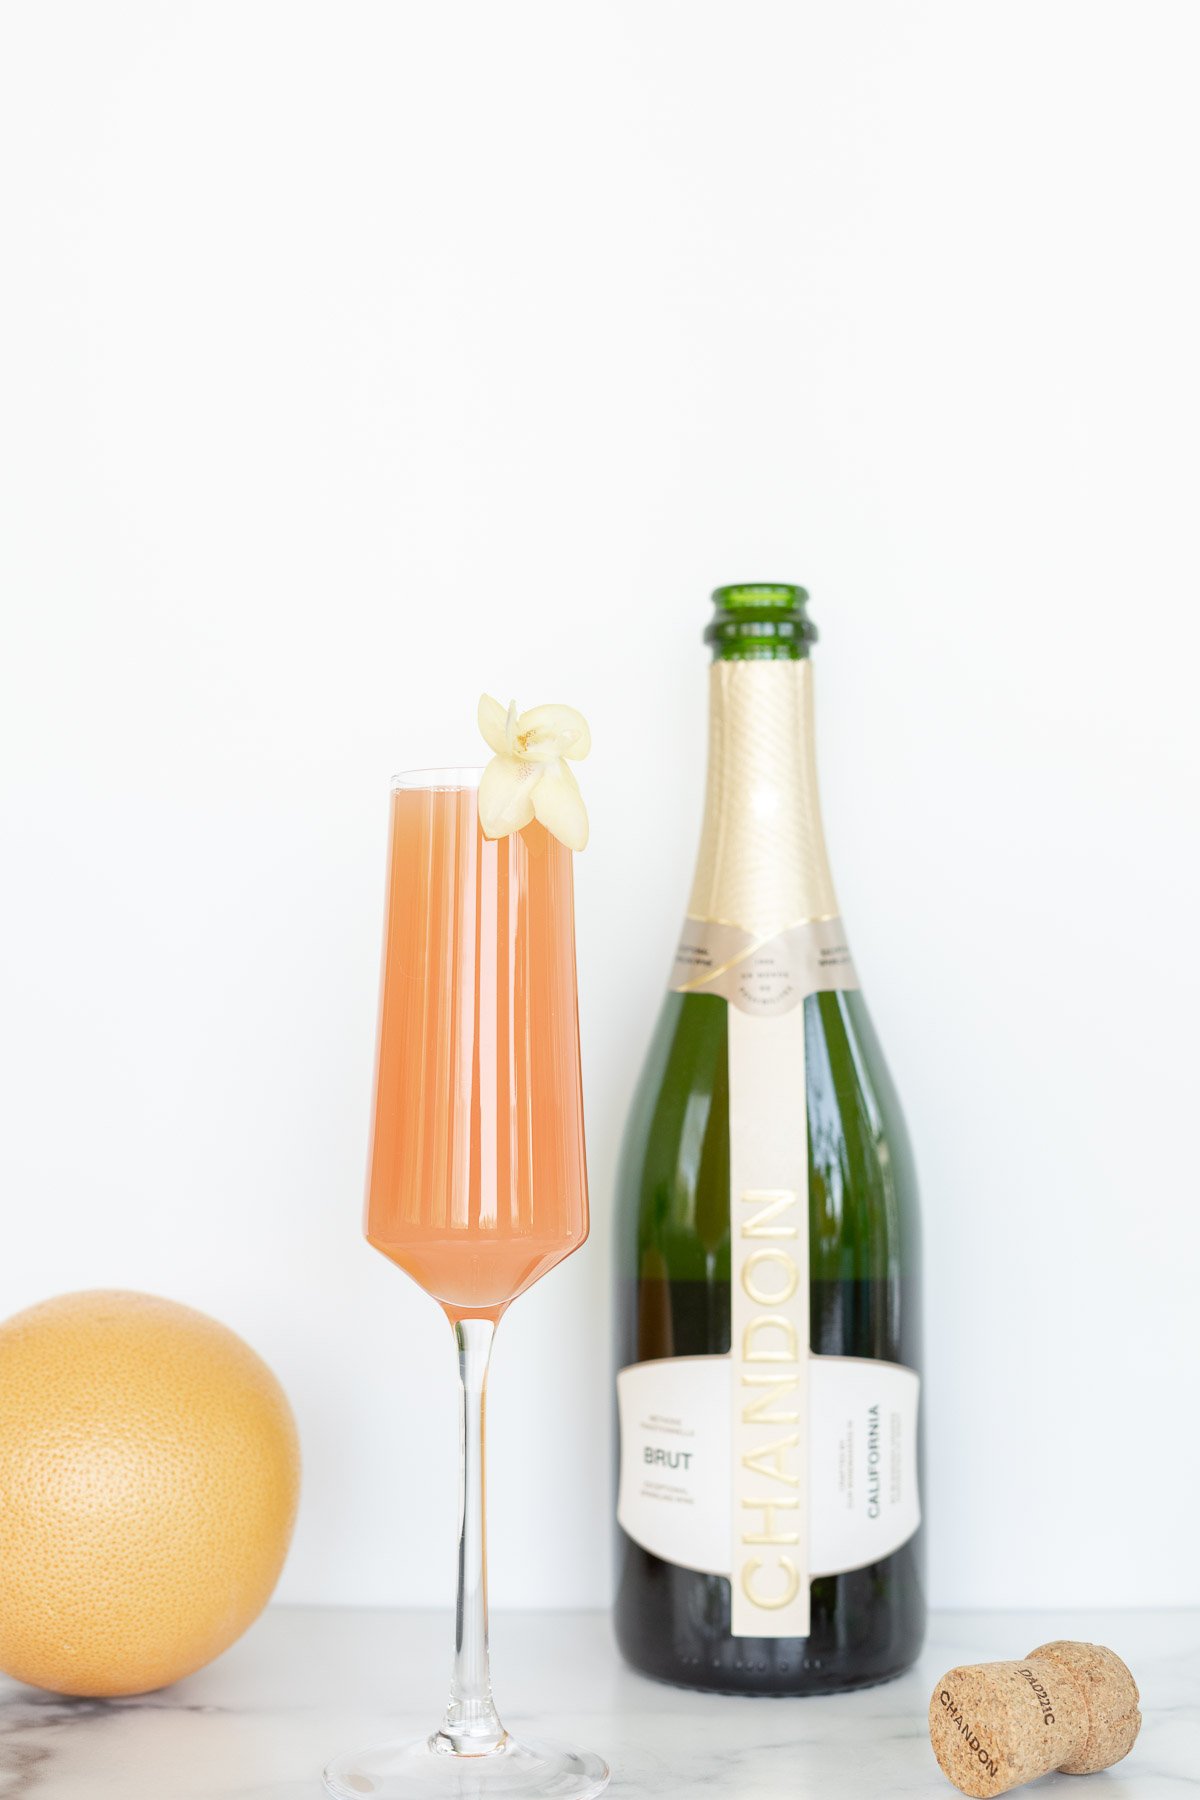 A glass of champagne next to a bottle of orange juice, perfect for Amazon gadgets enthusiasts.